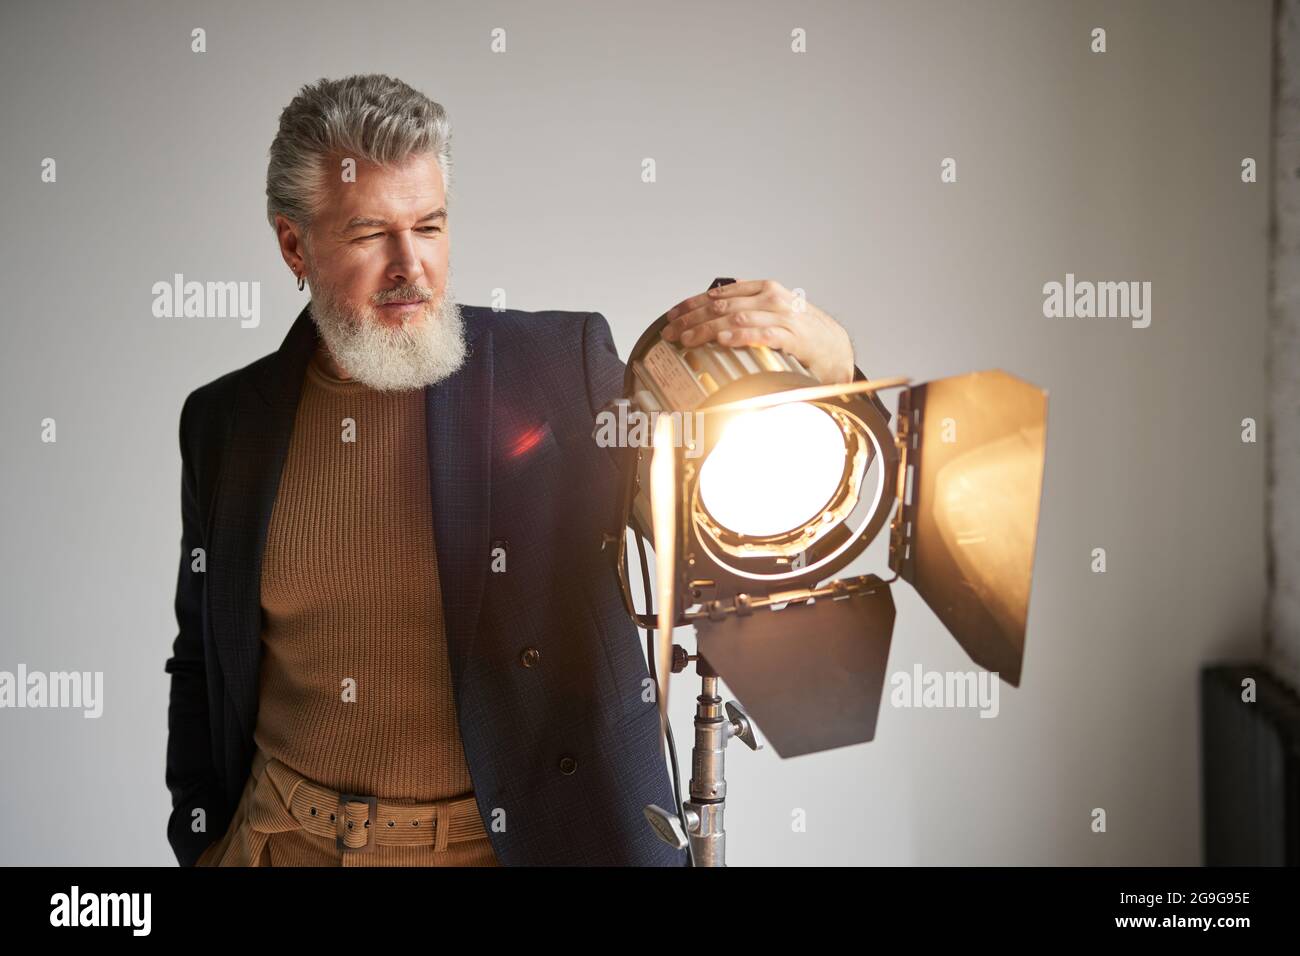 Portrait of handsome bearded middle aged man dressed elegantly standing next to studio spotlight while posing for camera over white background Stock Photo